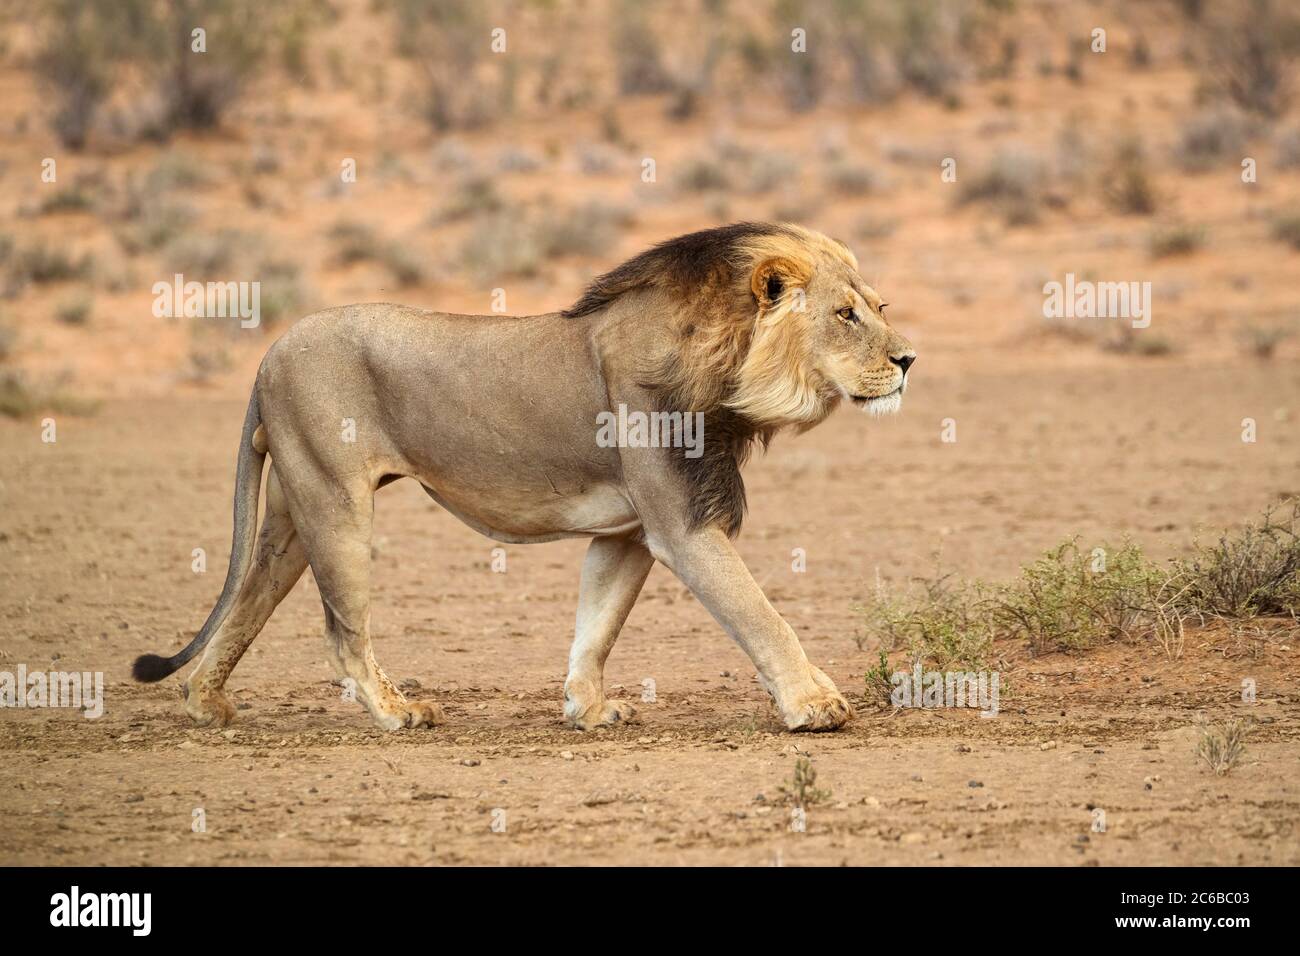 Lion (Panthera leo) on the move, Kgalagadi Transfrontier Park, South Africa, Africa Stock Photo